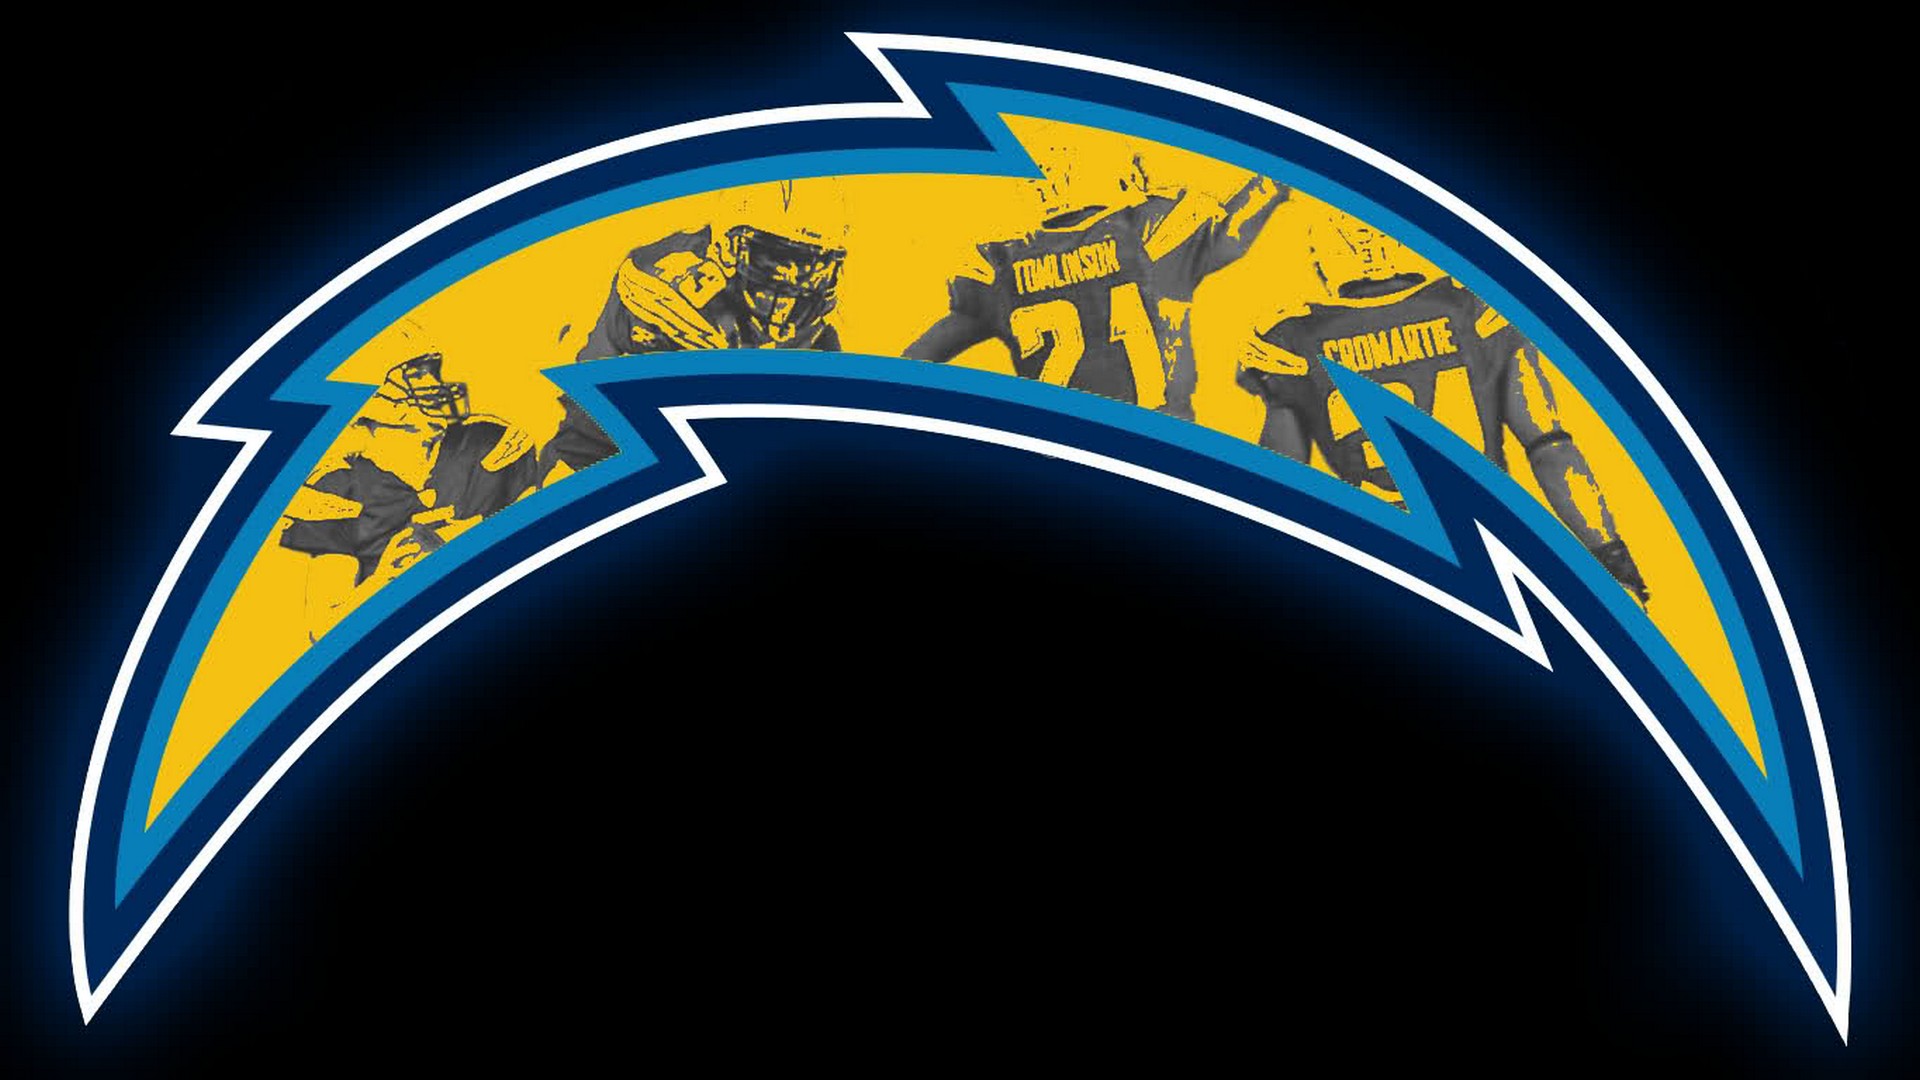 Los Angeles Chargers Wallpaper Hd - La Chargers Wallpaper 2018 - HD Wallpaper 